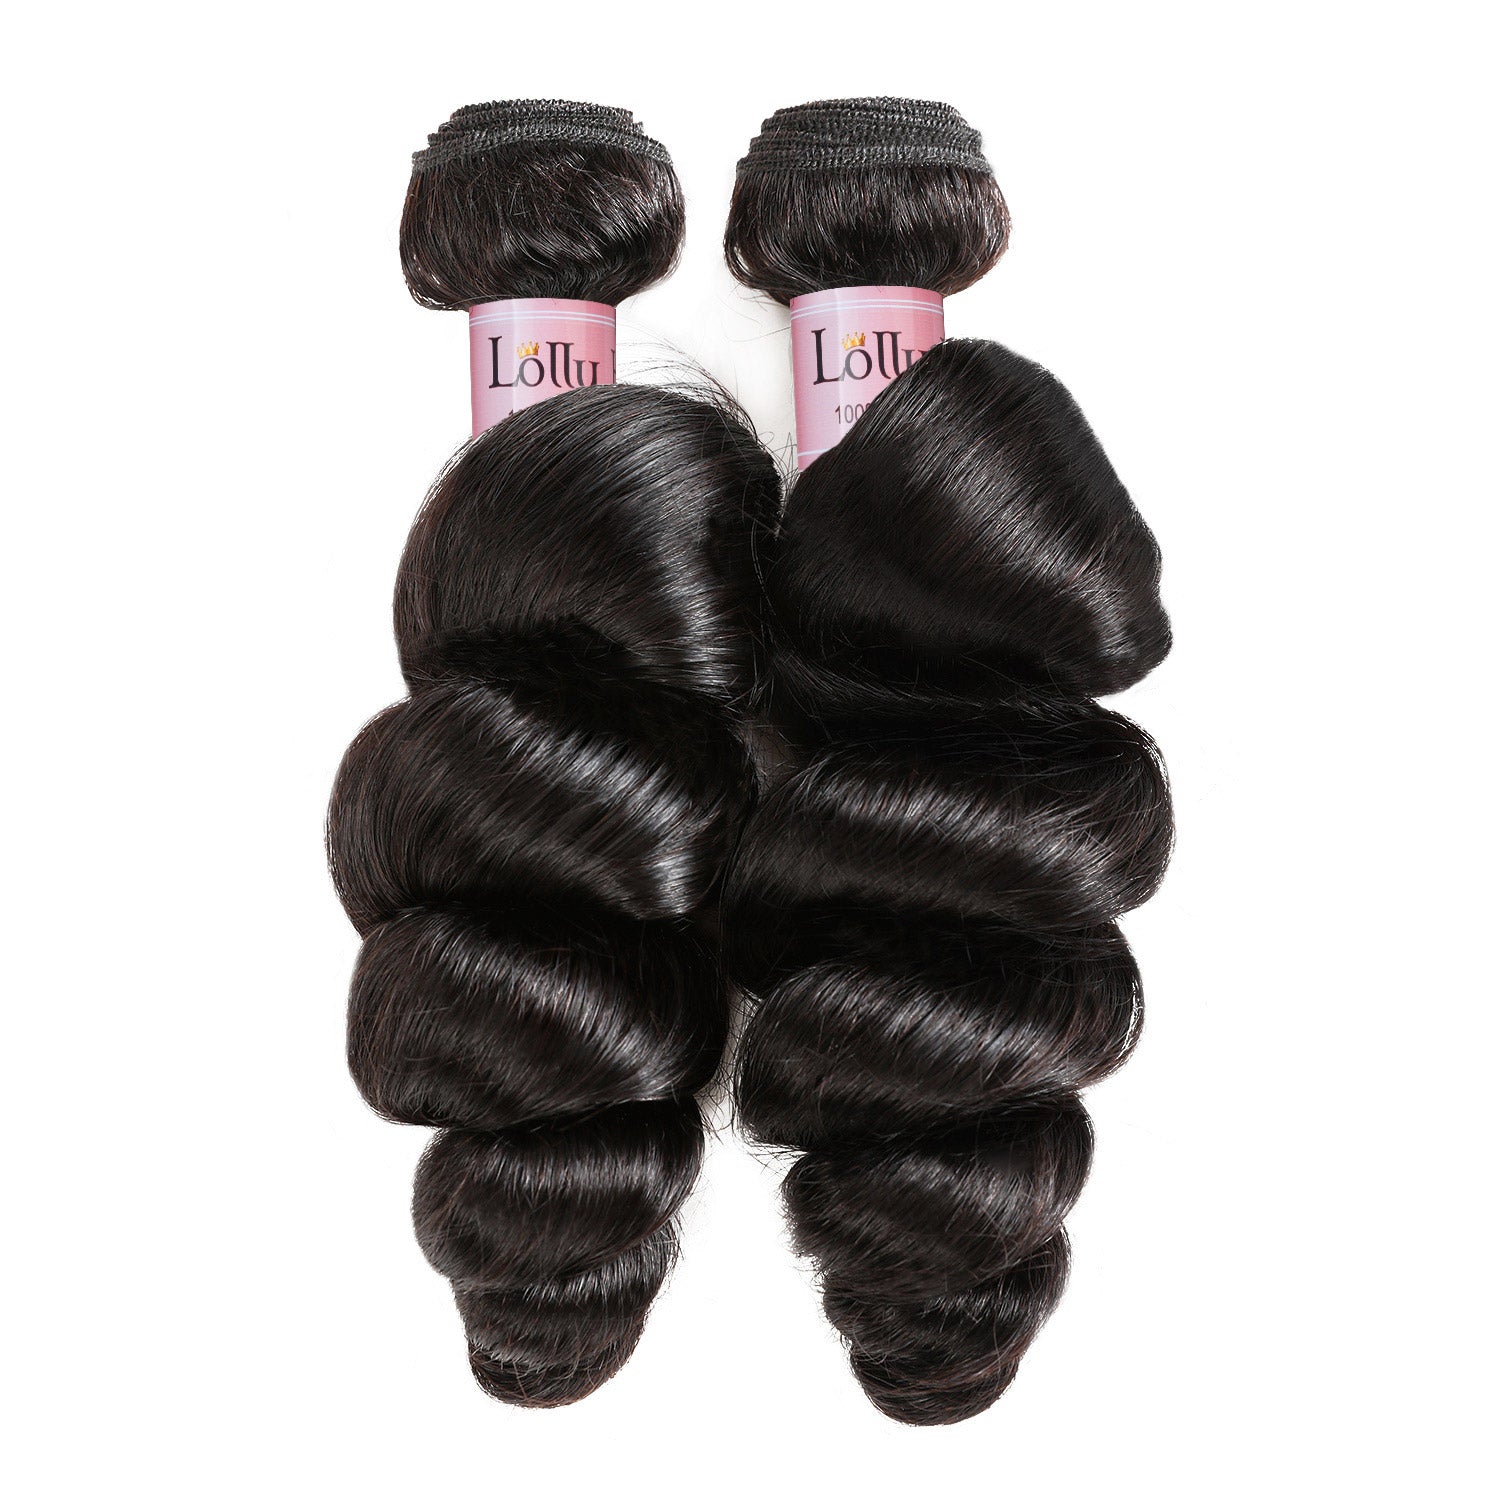 Lolly Loose Wave Hair Extensions 2 Bundles 